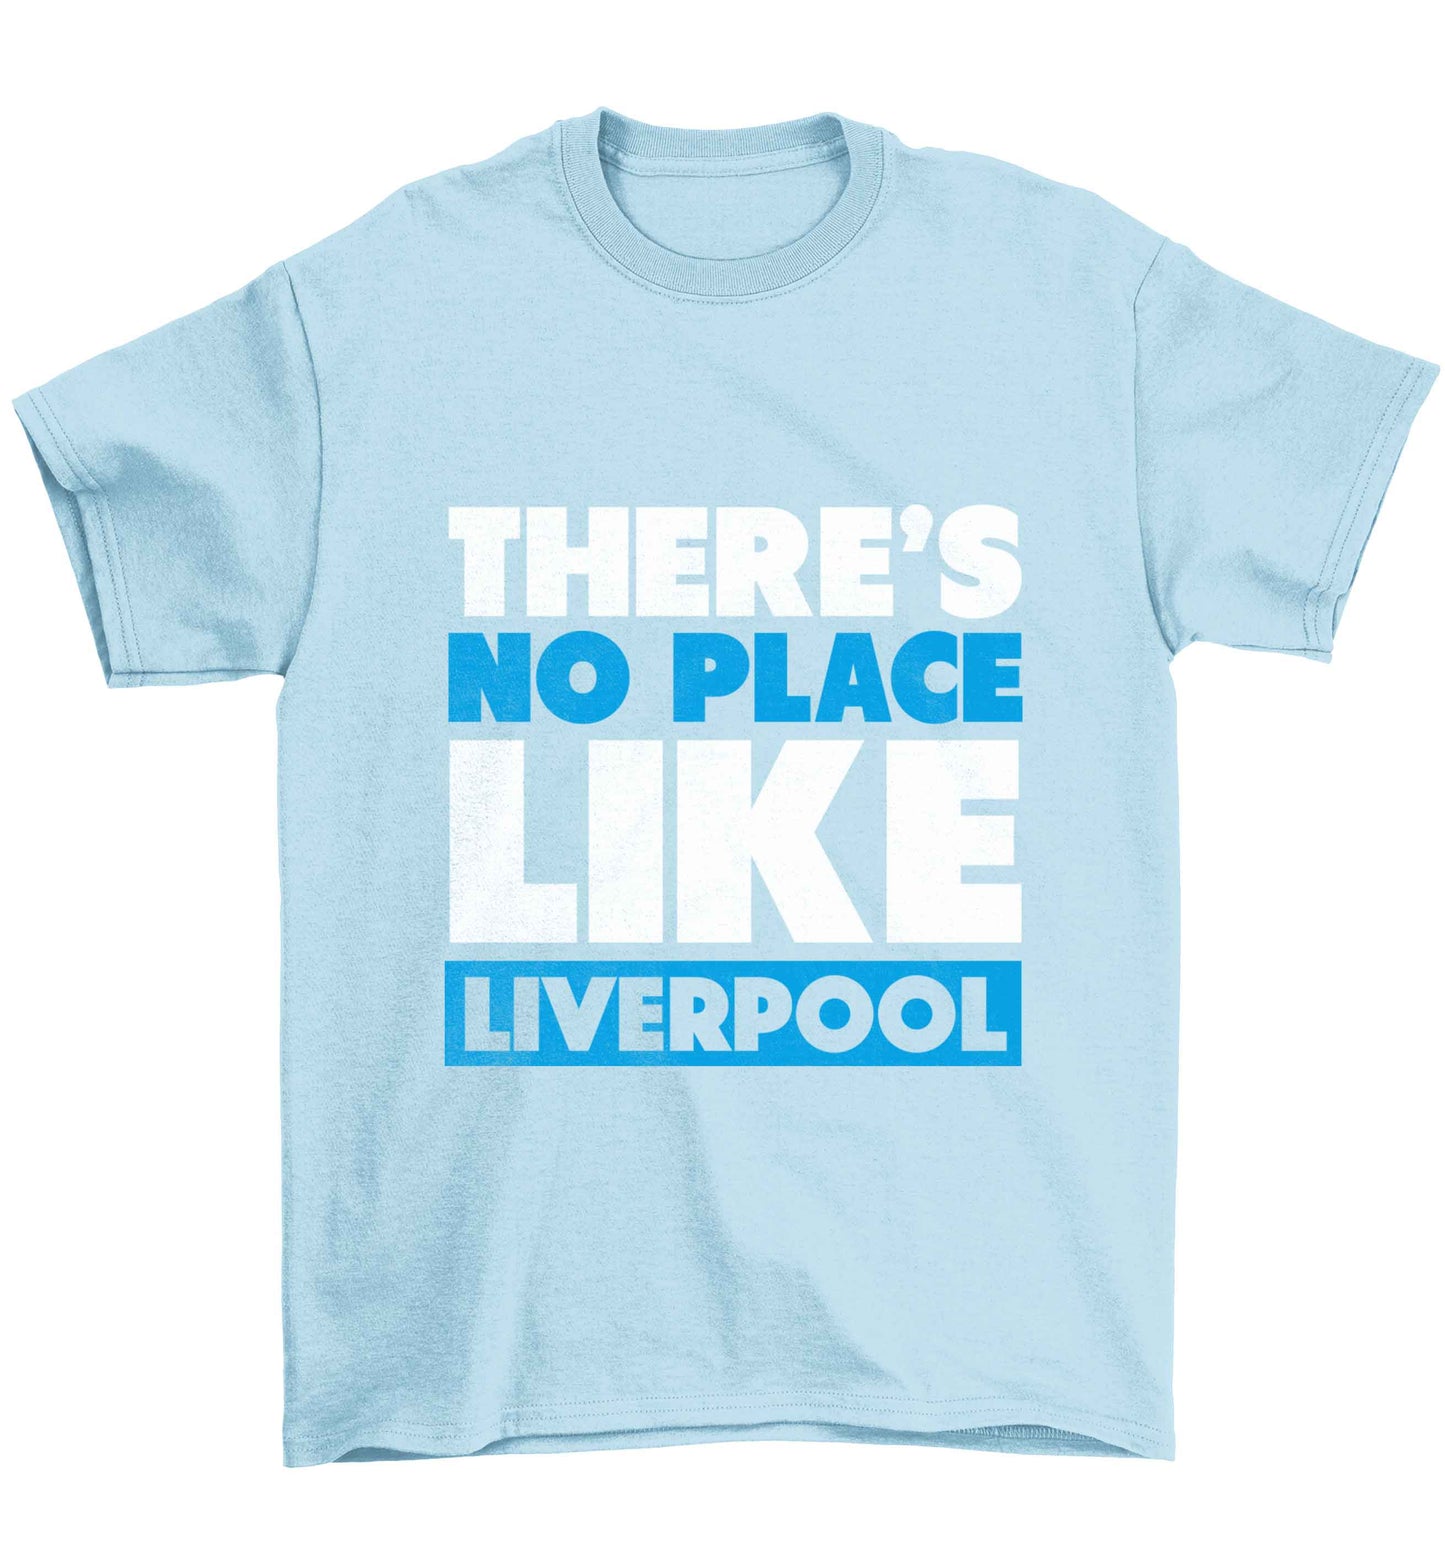 There's no place like Liverpool Children's light blue Tshirt 12-13 Years